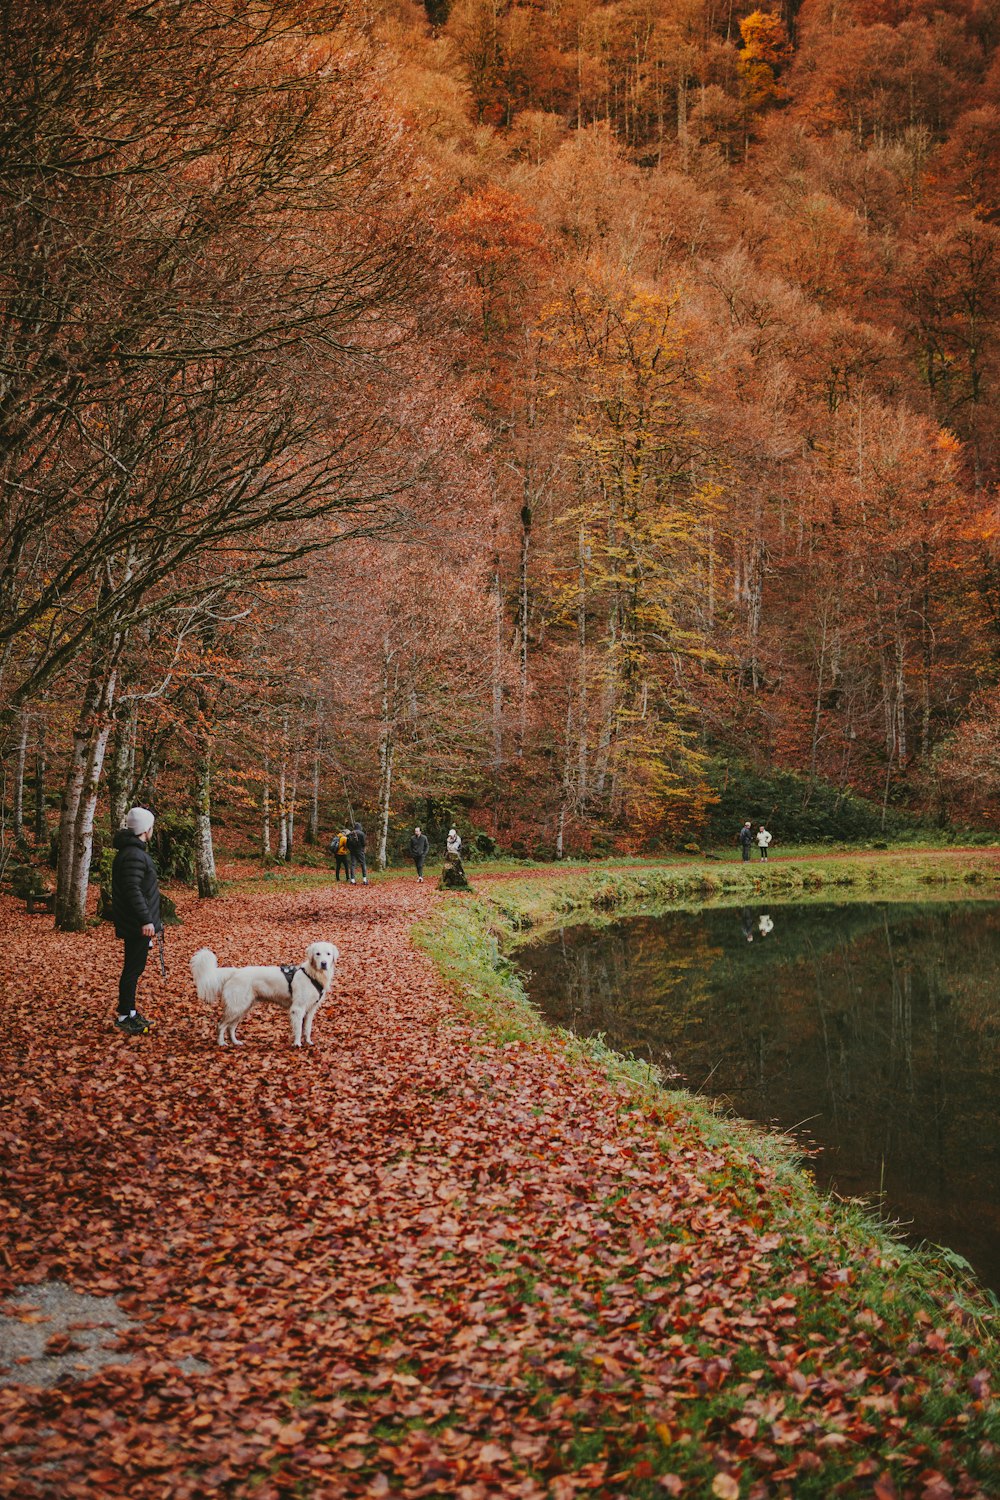 a person walking with two dogs on a leaf covered path